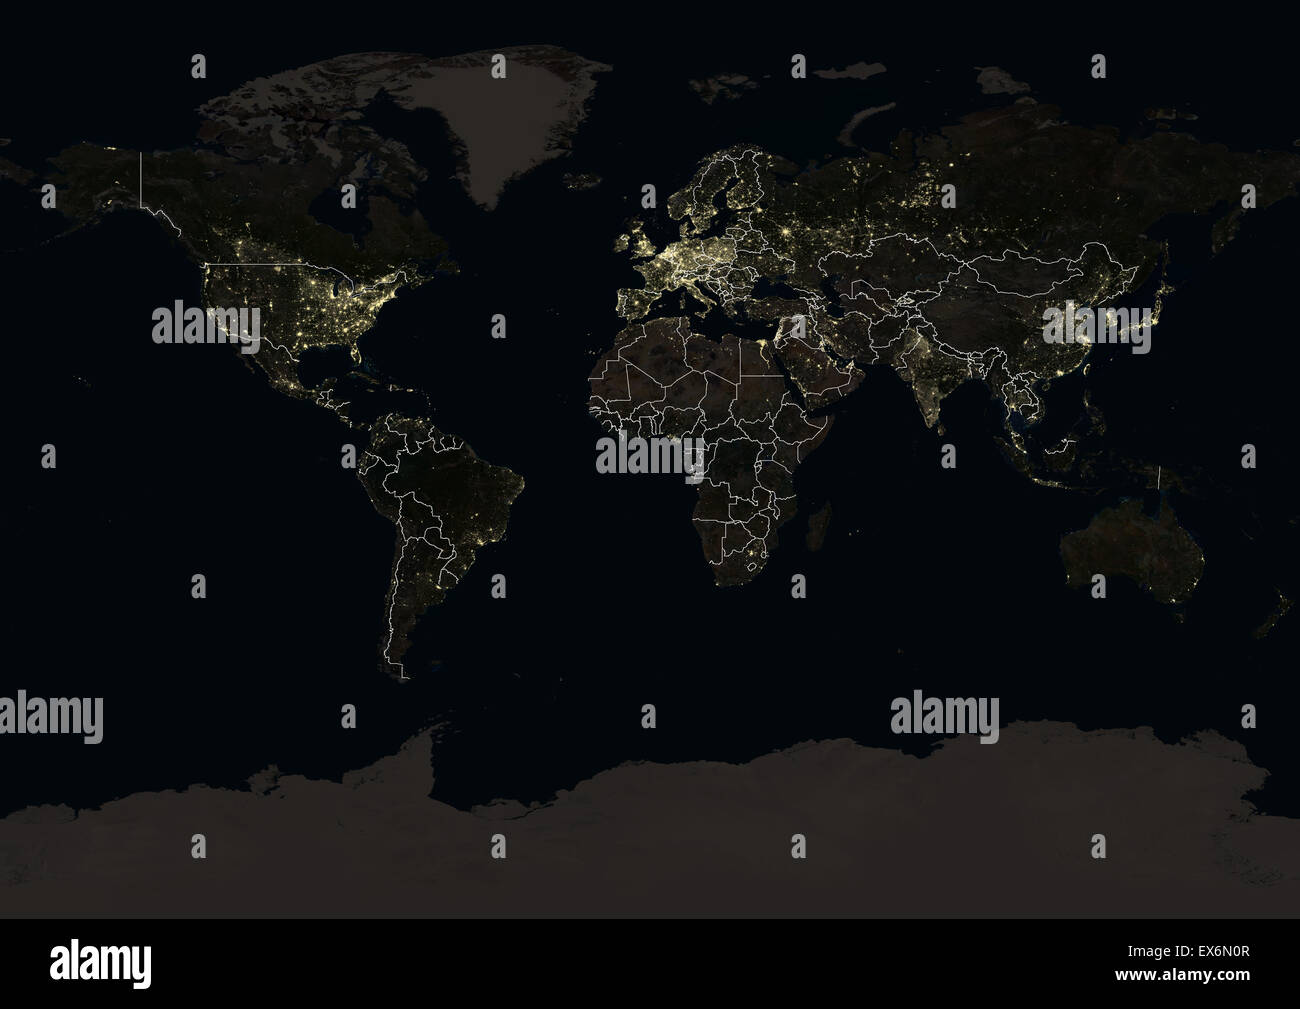 World at night in 2012, showing a world map in Miller projection. This satellite image with country borders shows urban and Stock Photo